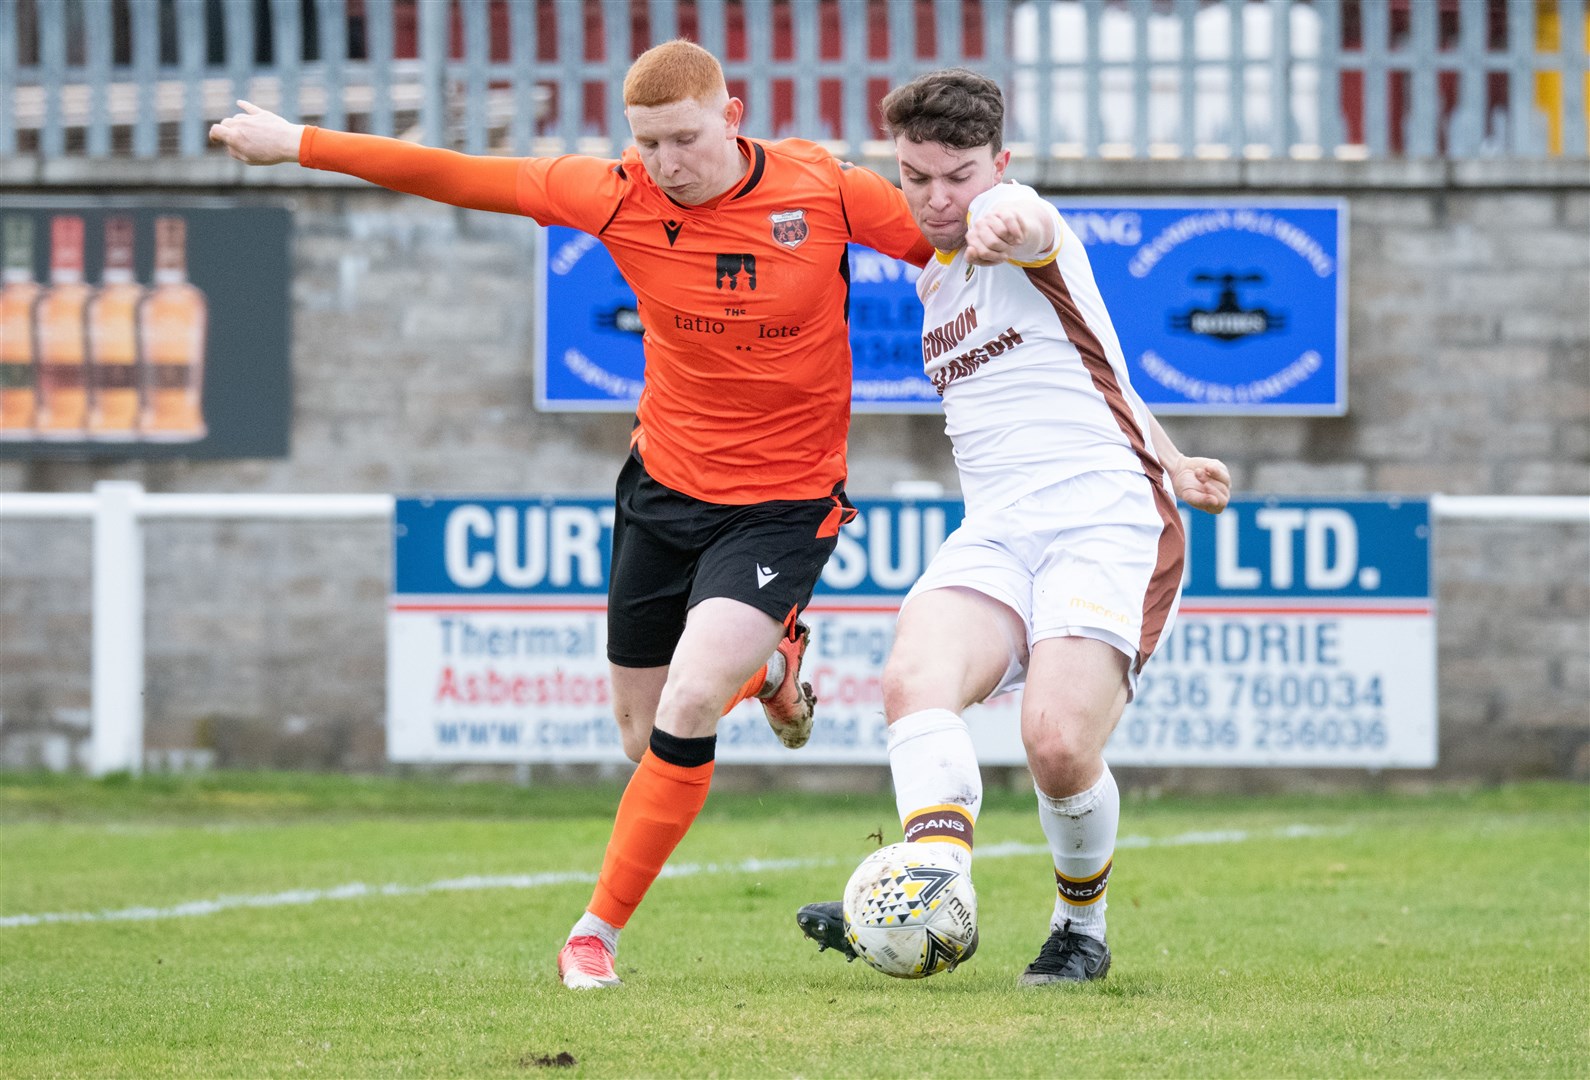 Forres' Ruari Fraser holds off a challenging Aidan Wilson of the home side...Rothes FC (2) vs Forres Mechanics FC (1) - Highland Football League 22/23 - Mackessack Park, Rothes 18/02/2023...(Picture: Daniel Forsyth..